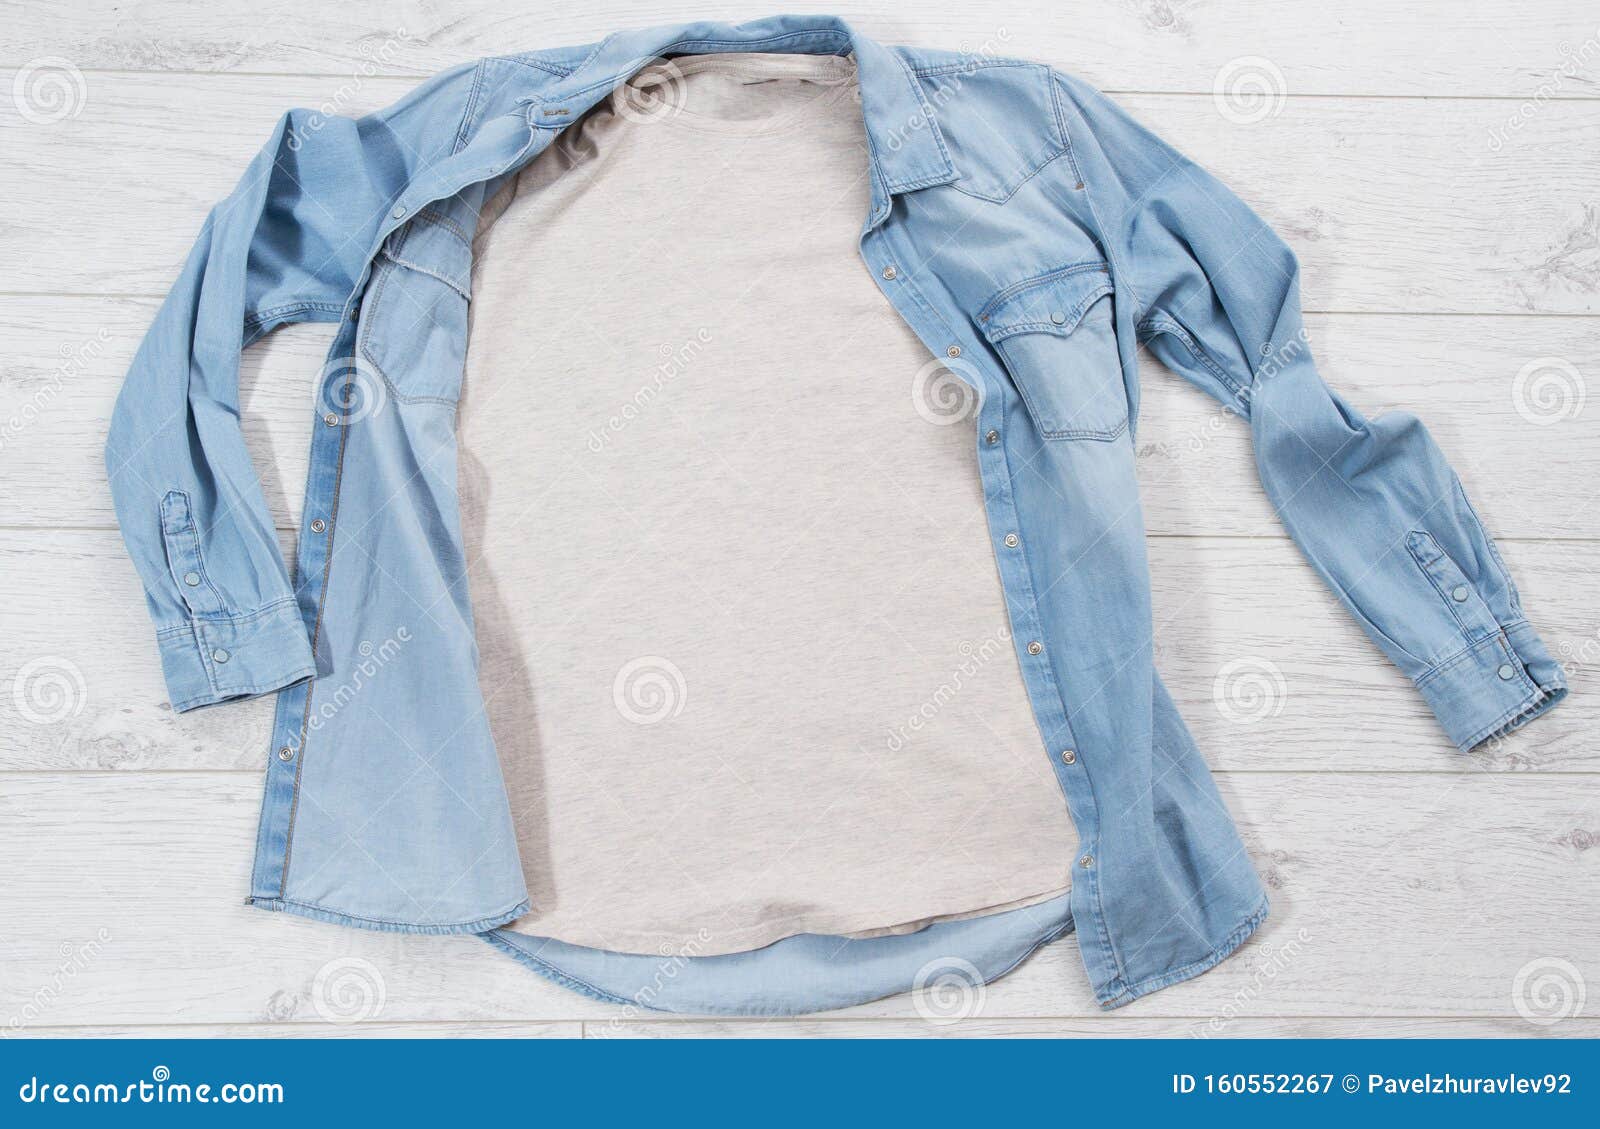 T Shirt Mock Up Jeans Denim Shirt Casual Clothing Top View, T-shirt And ...